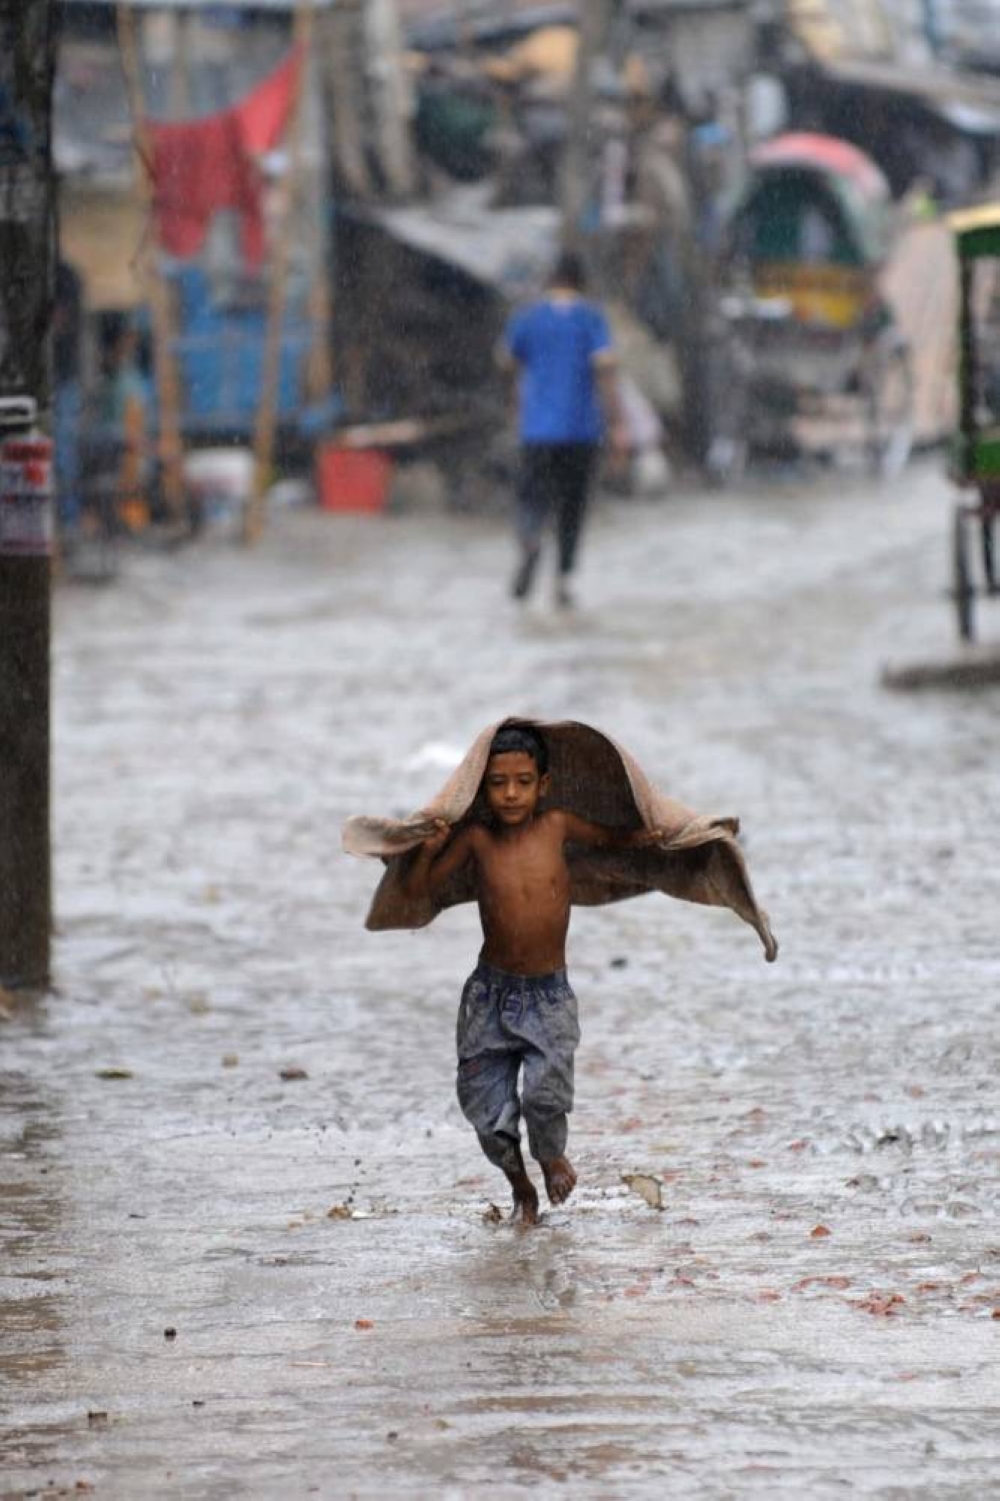 A Bangladeshi youth runs in the rain during a sudden downpour in Dhaka on July 9, 2009.  Seasonal rain has brought a whiff of relief to the Dhaka dwellers who have been experiencing dry and dusty weather amid power failures due to load shedding.  AFP PHOTO/Munir uz ZAMAN